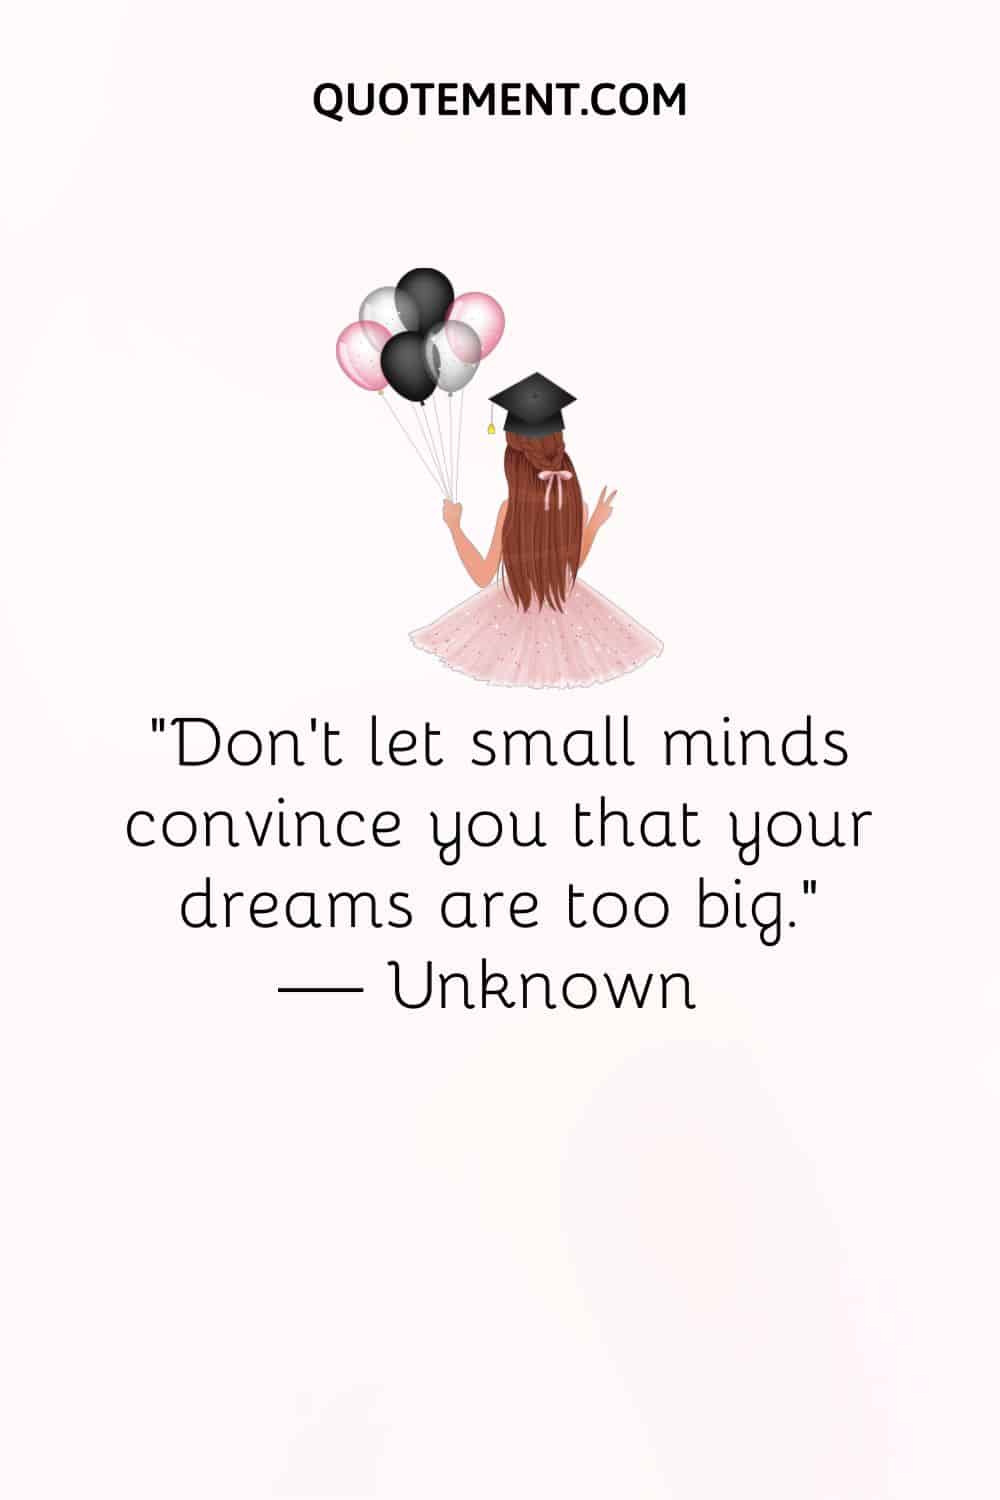 “Don’t let small minds convince you that your dreams are too big.” — Unknown